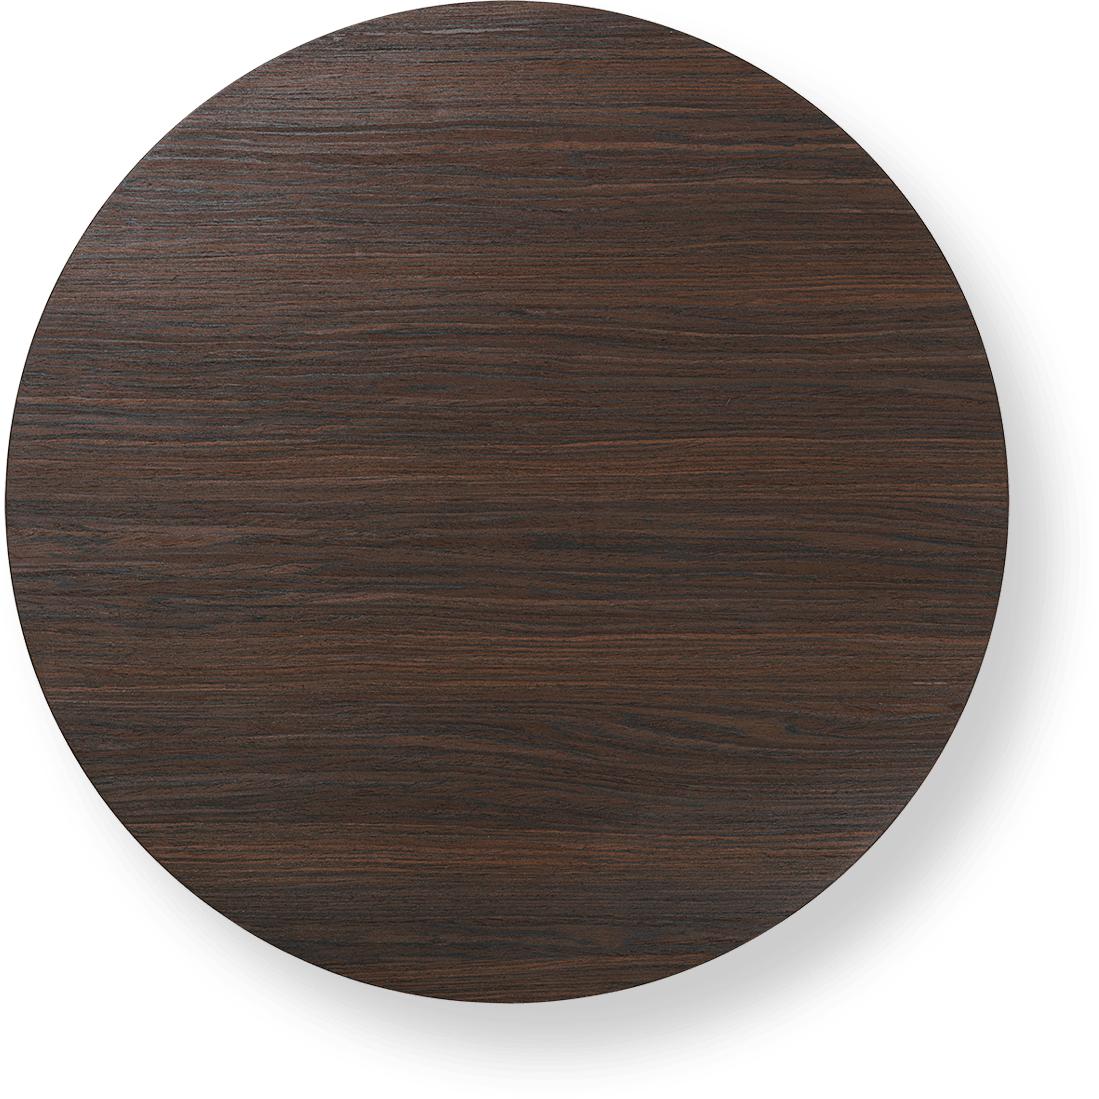 Ferm Living Post Coffee Table Smoked Oak Small, Lines